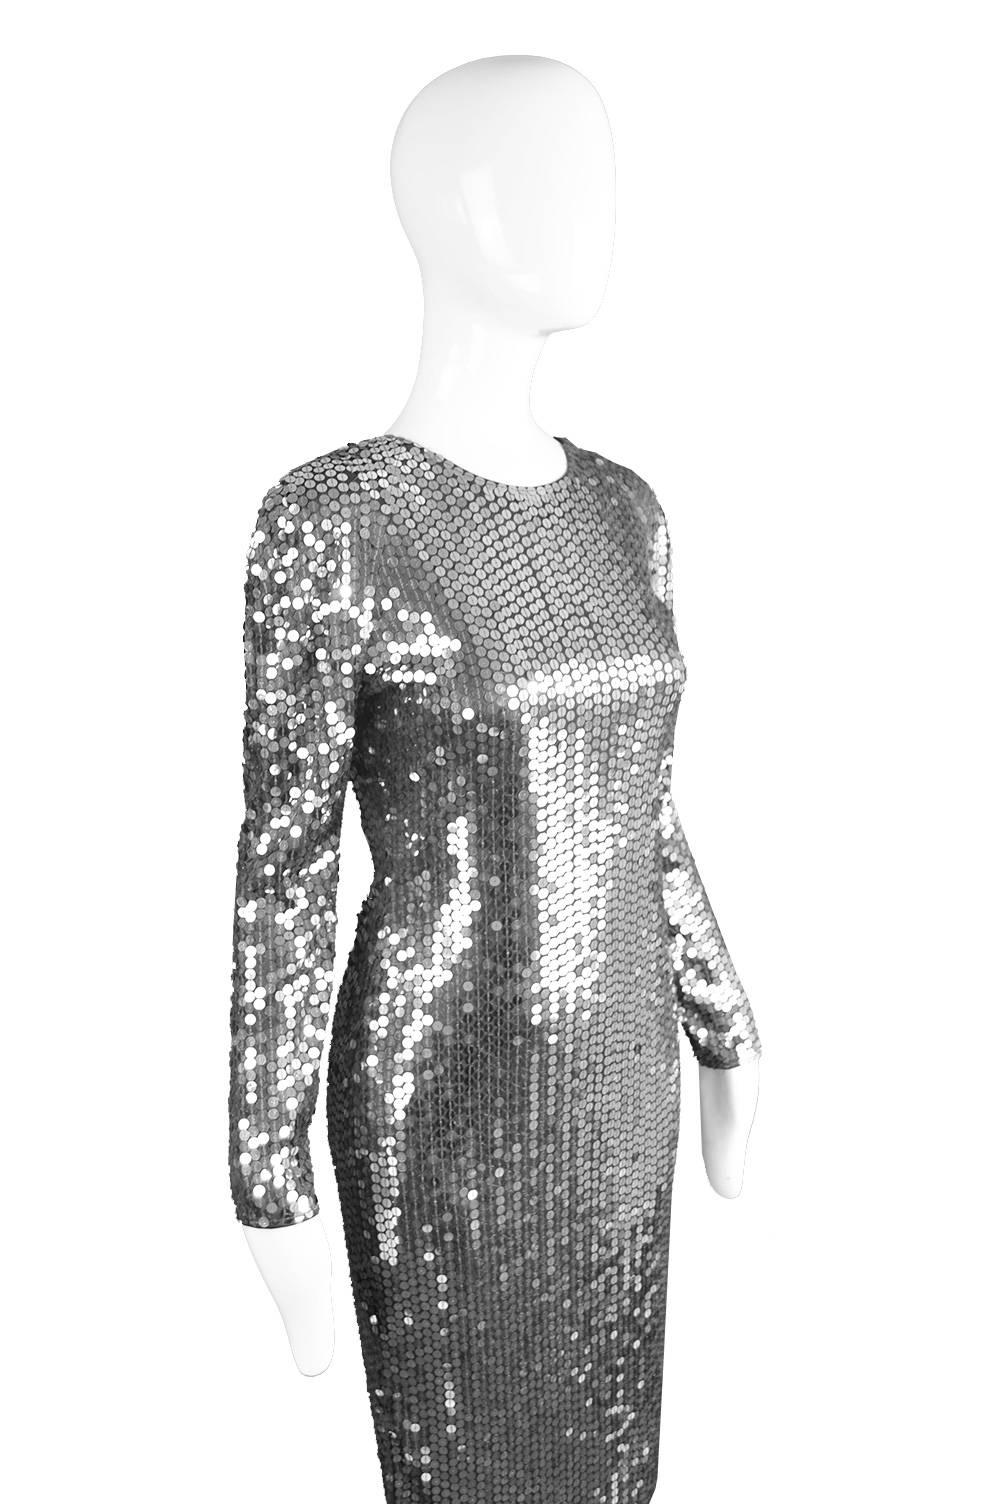 Halston Silver Sequin Dress with Deep Scoop Back, 1970s For Sale 2